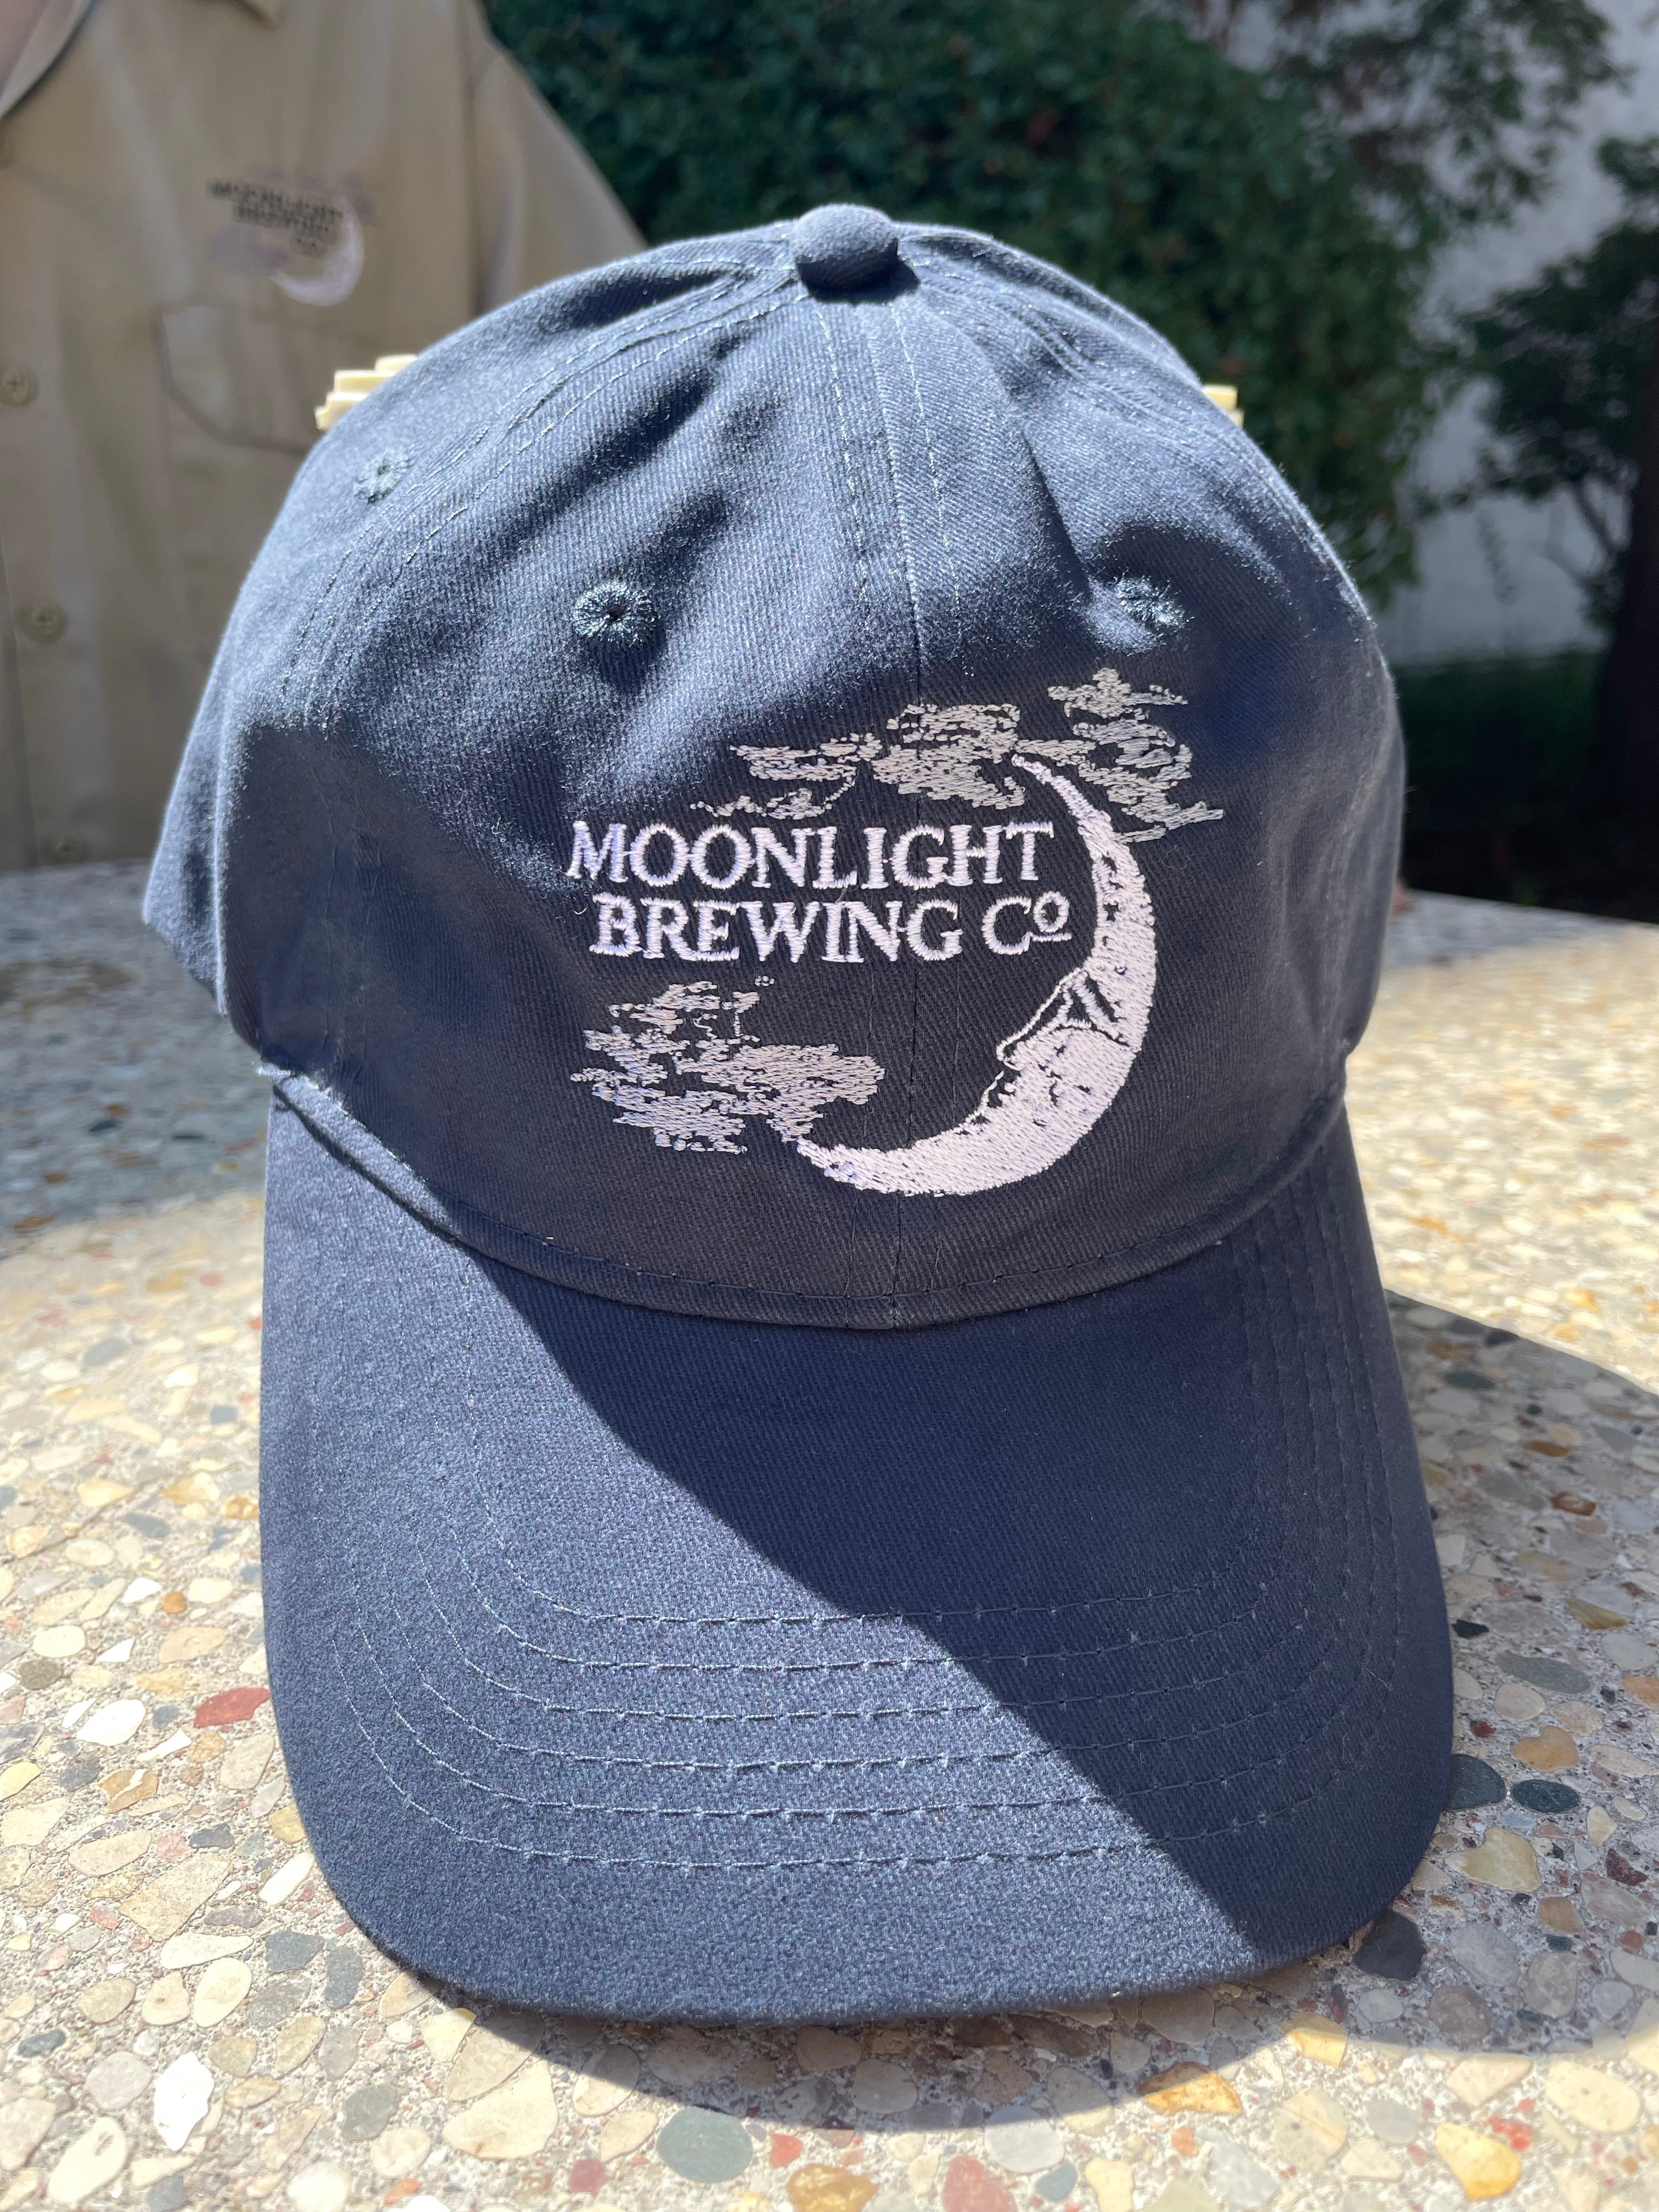 Navy blue twill ball cap with Moonlight Brewing logo on front